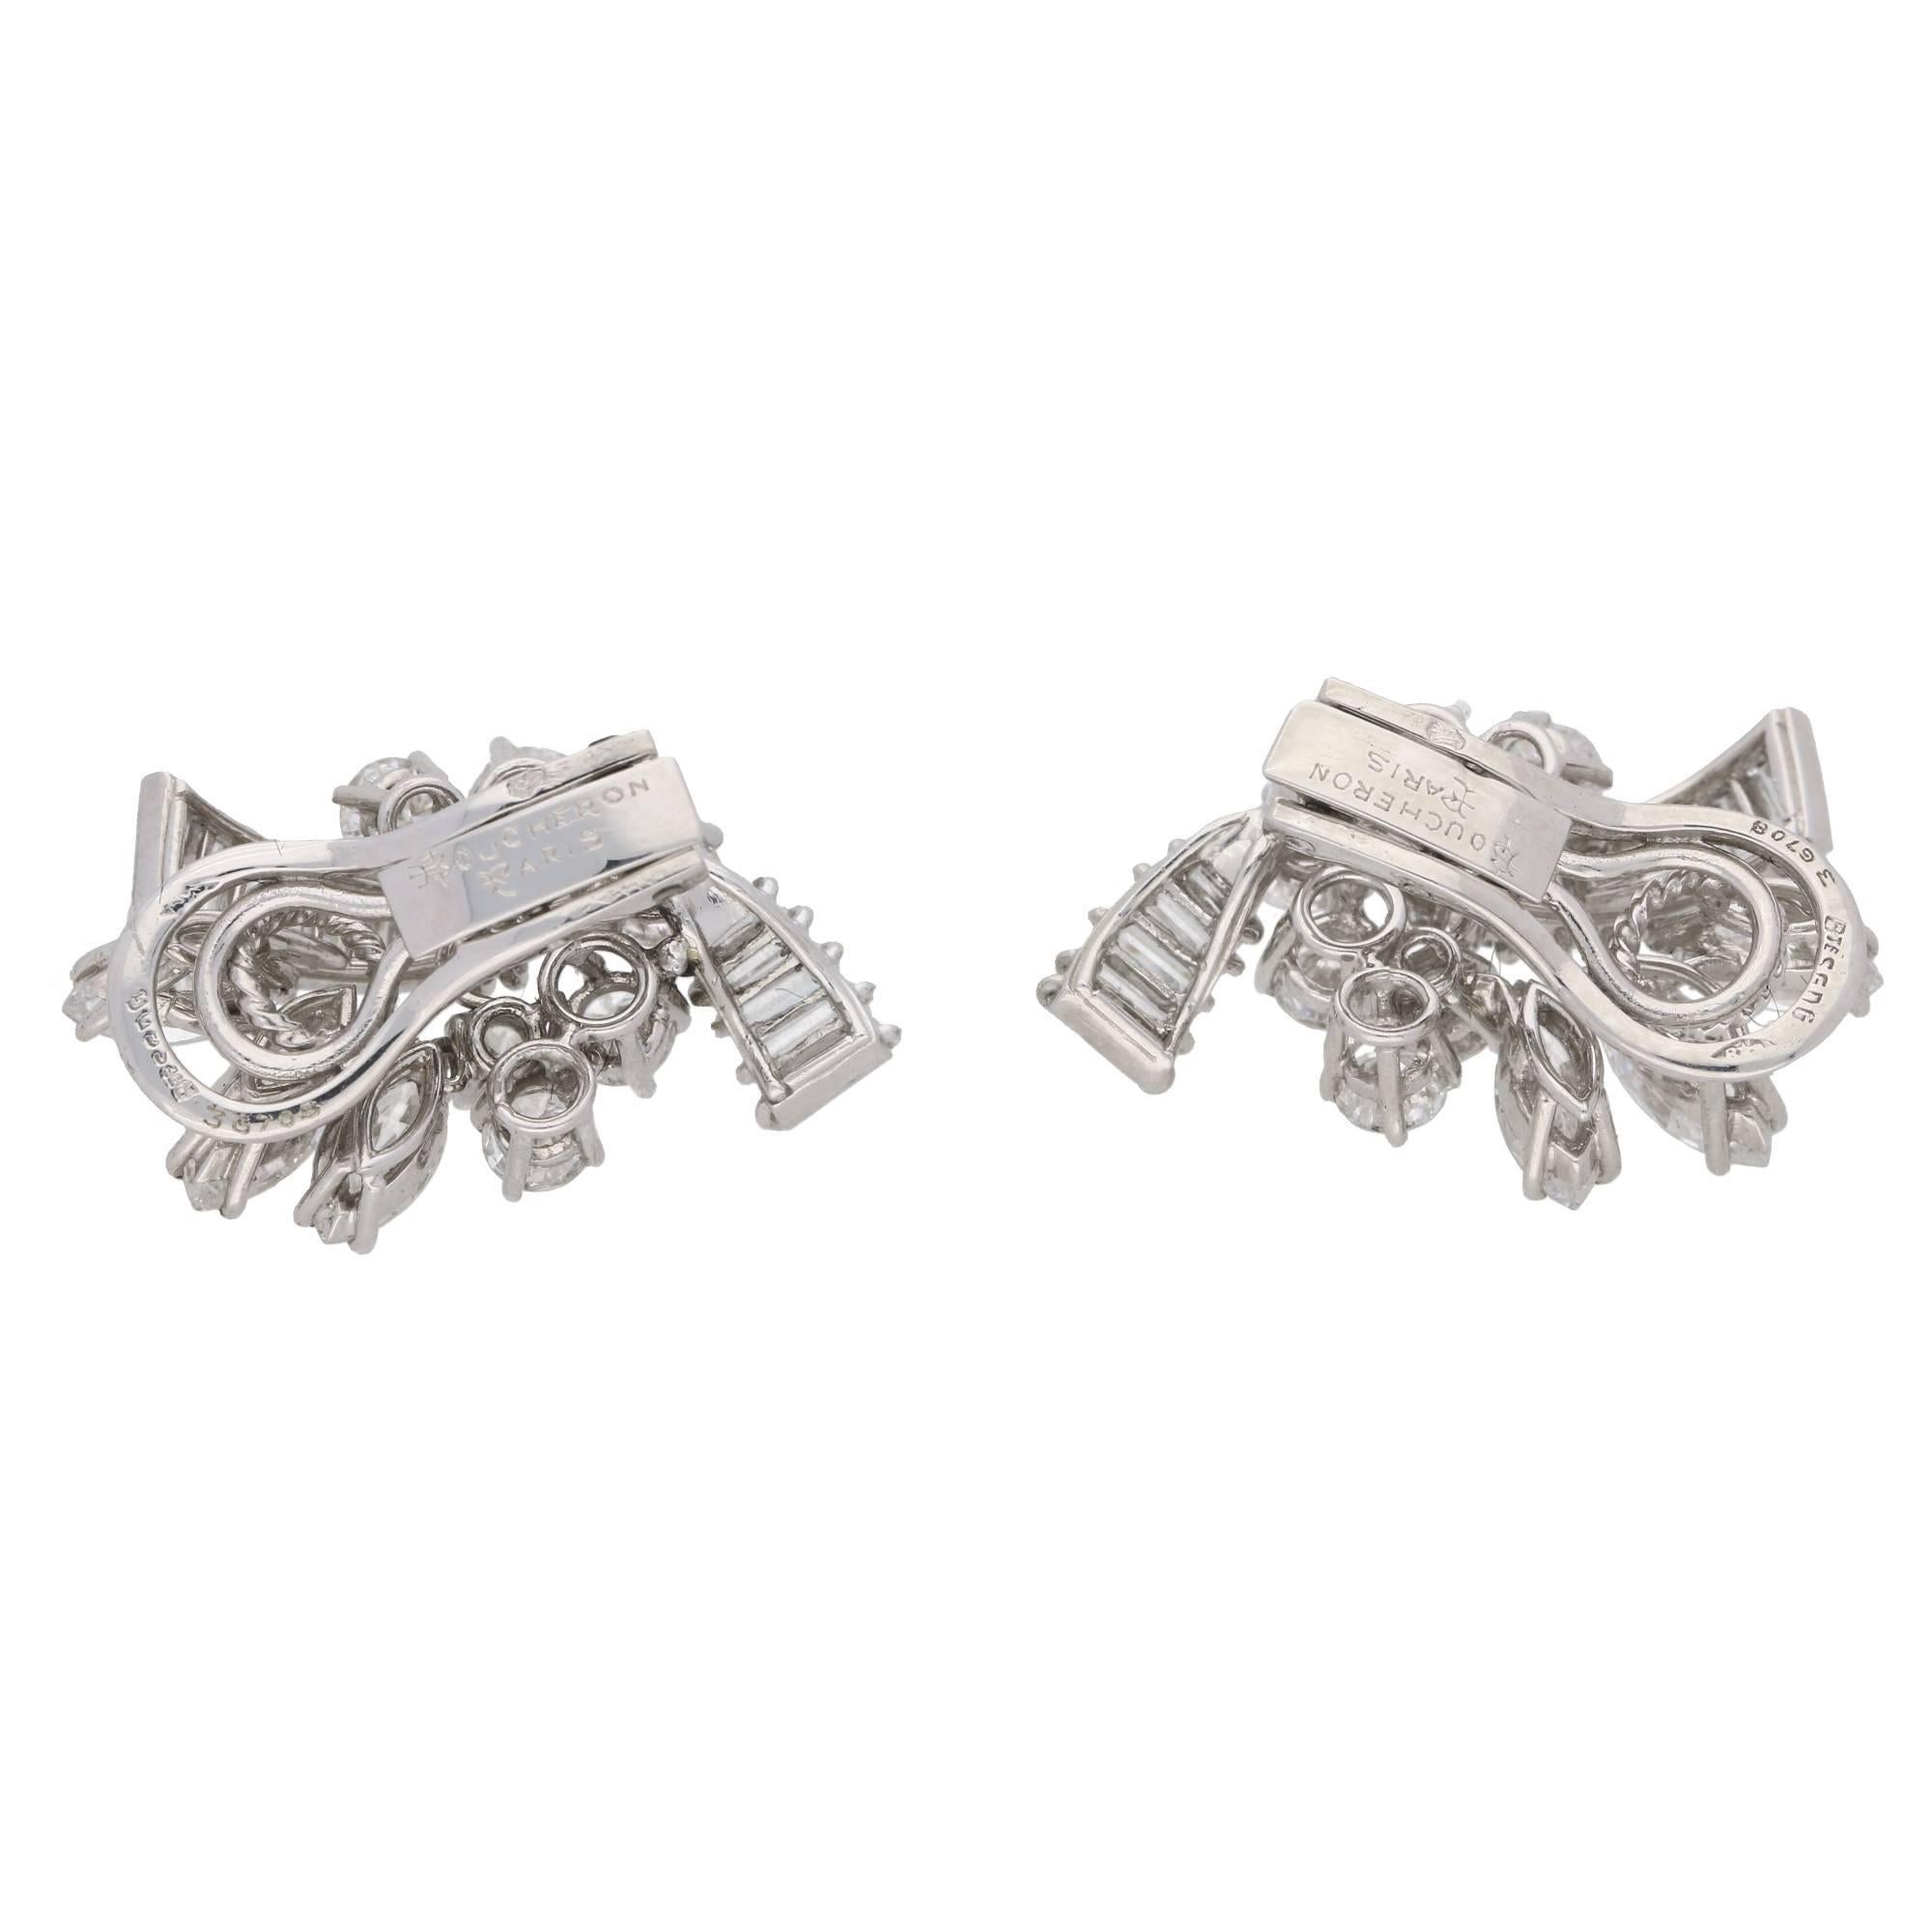 A pair of 1950's platinum and diamond spray ear clips by Boucheron Paris. Each earring comprises of a melody of diamond cuts, round brilliants, marquises and baguette cuts, expertly set into a delicate and lively platinum mount. With three marquise